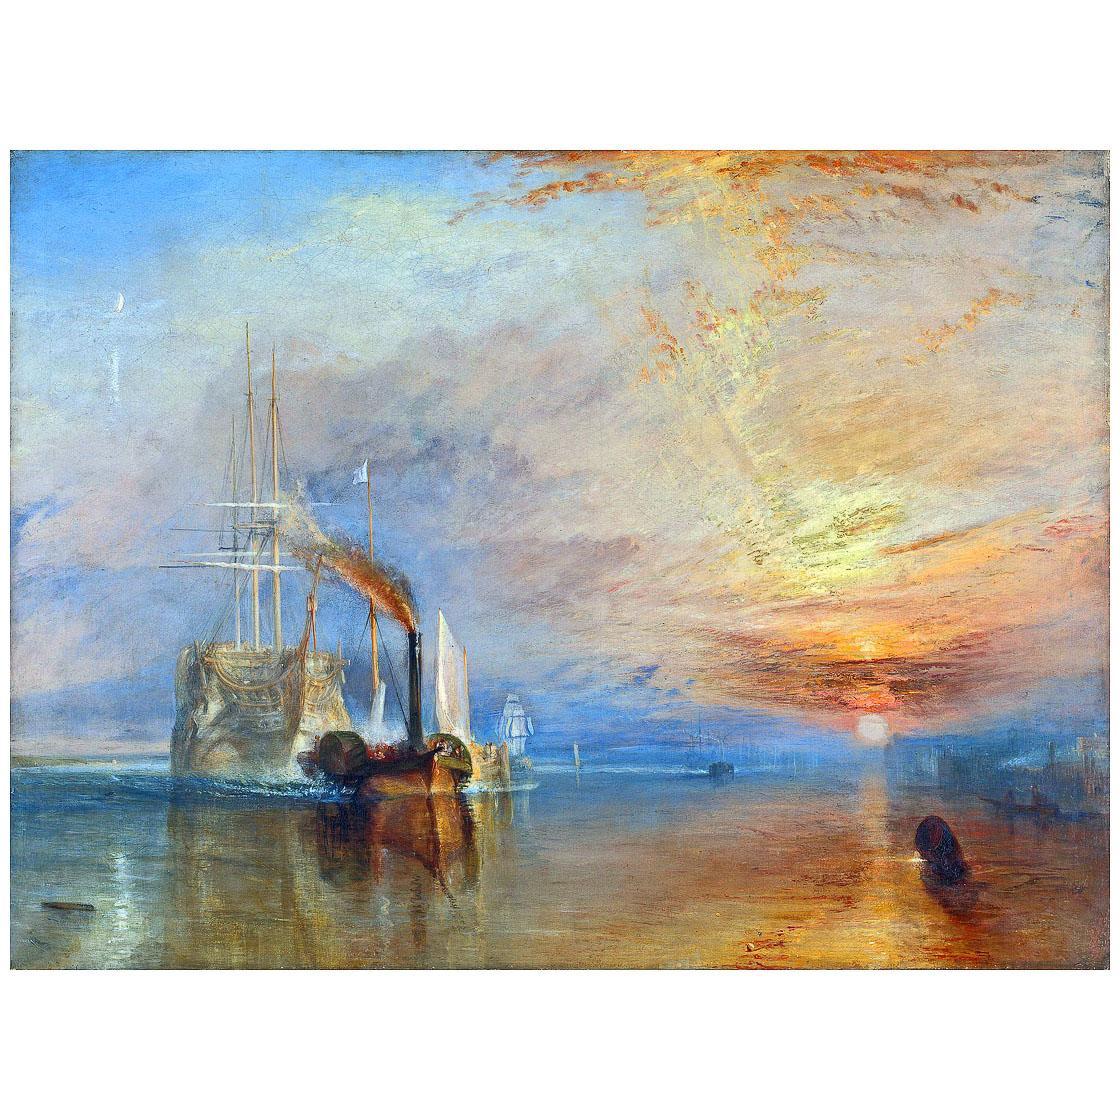 William Turner. The Fighting Temeraire. 1839. National Gallery London